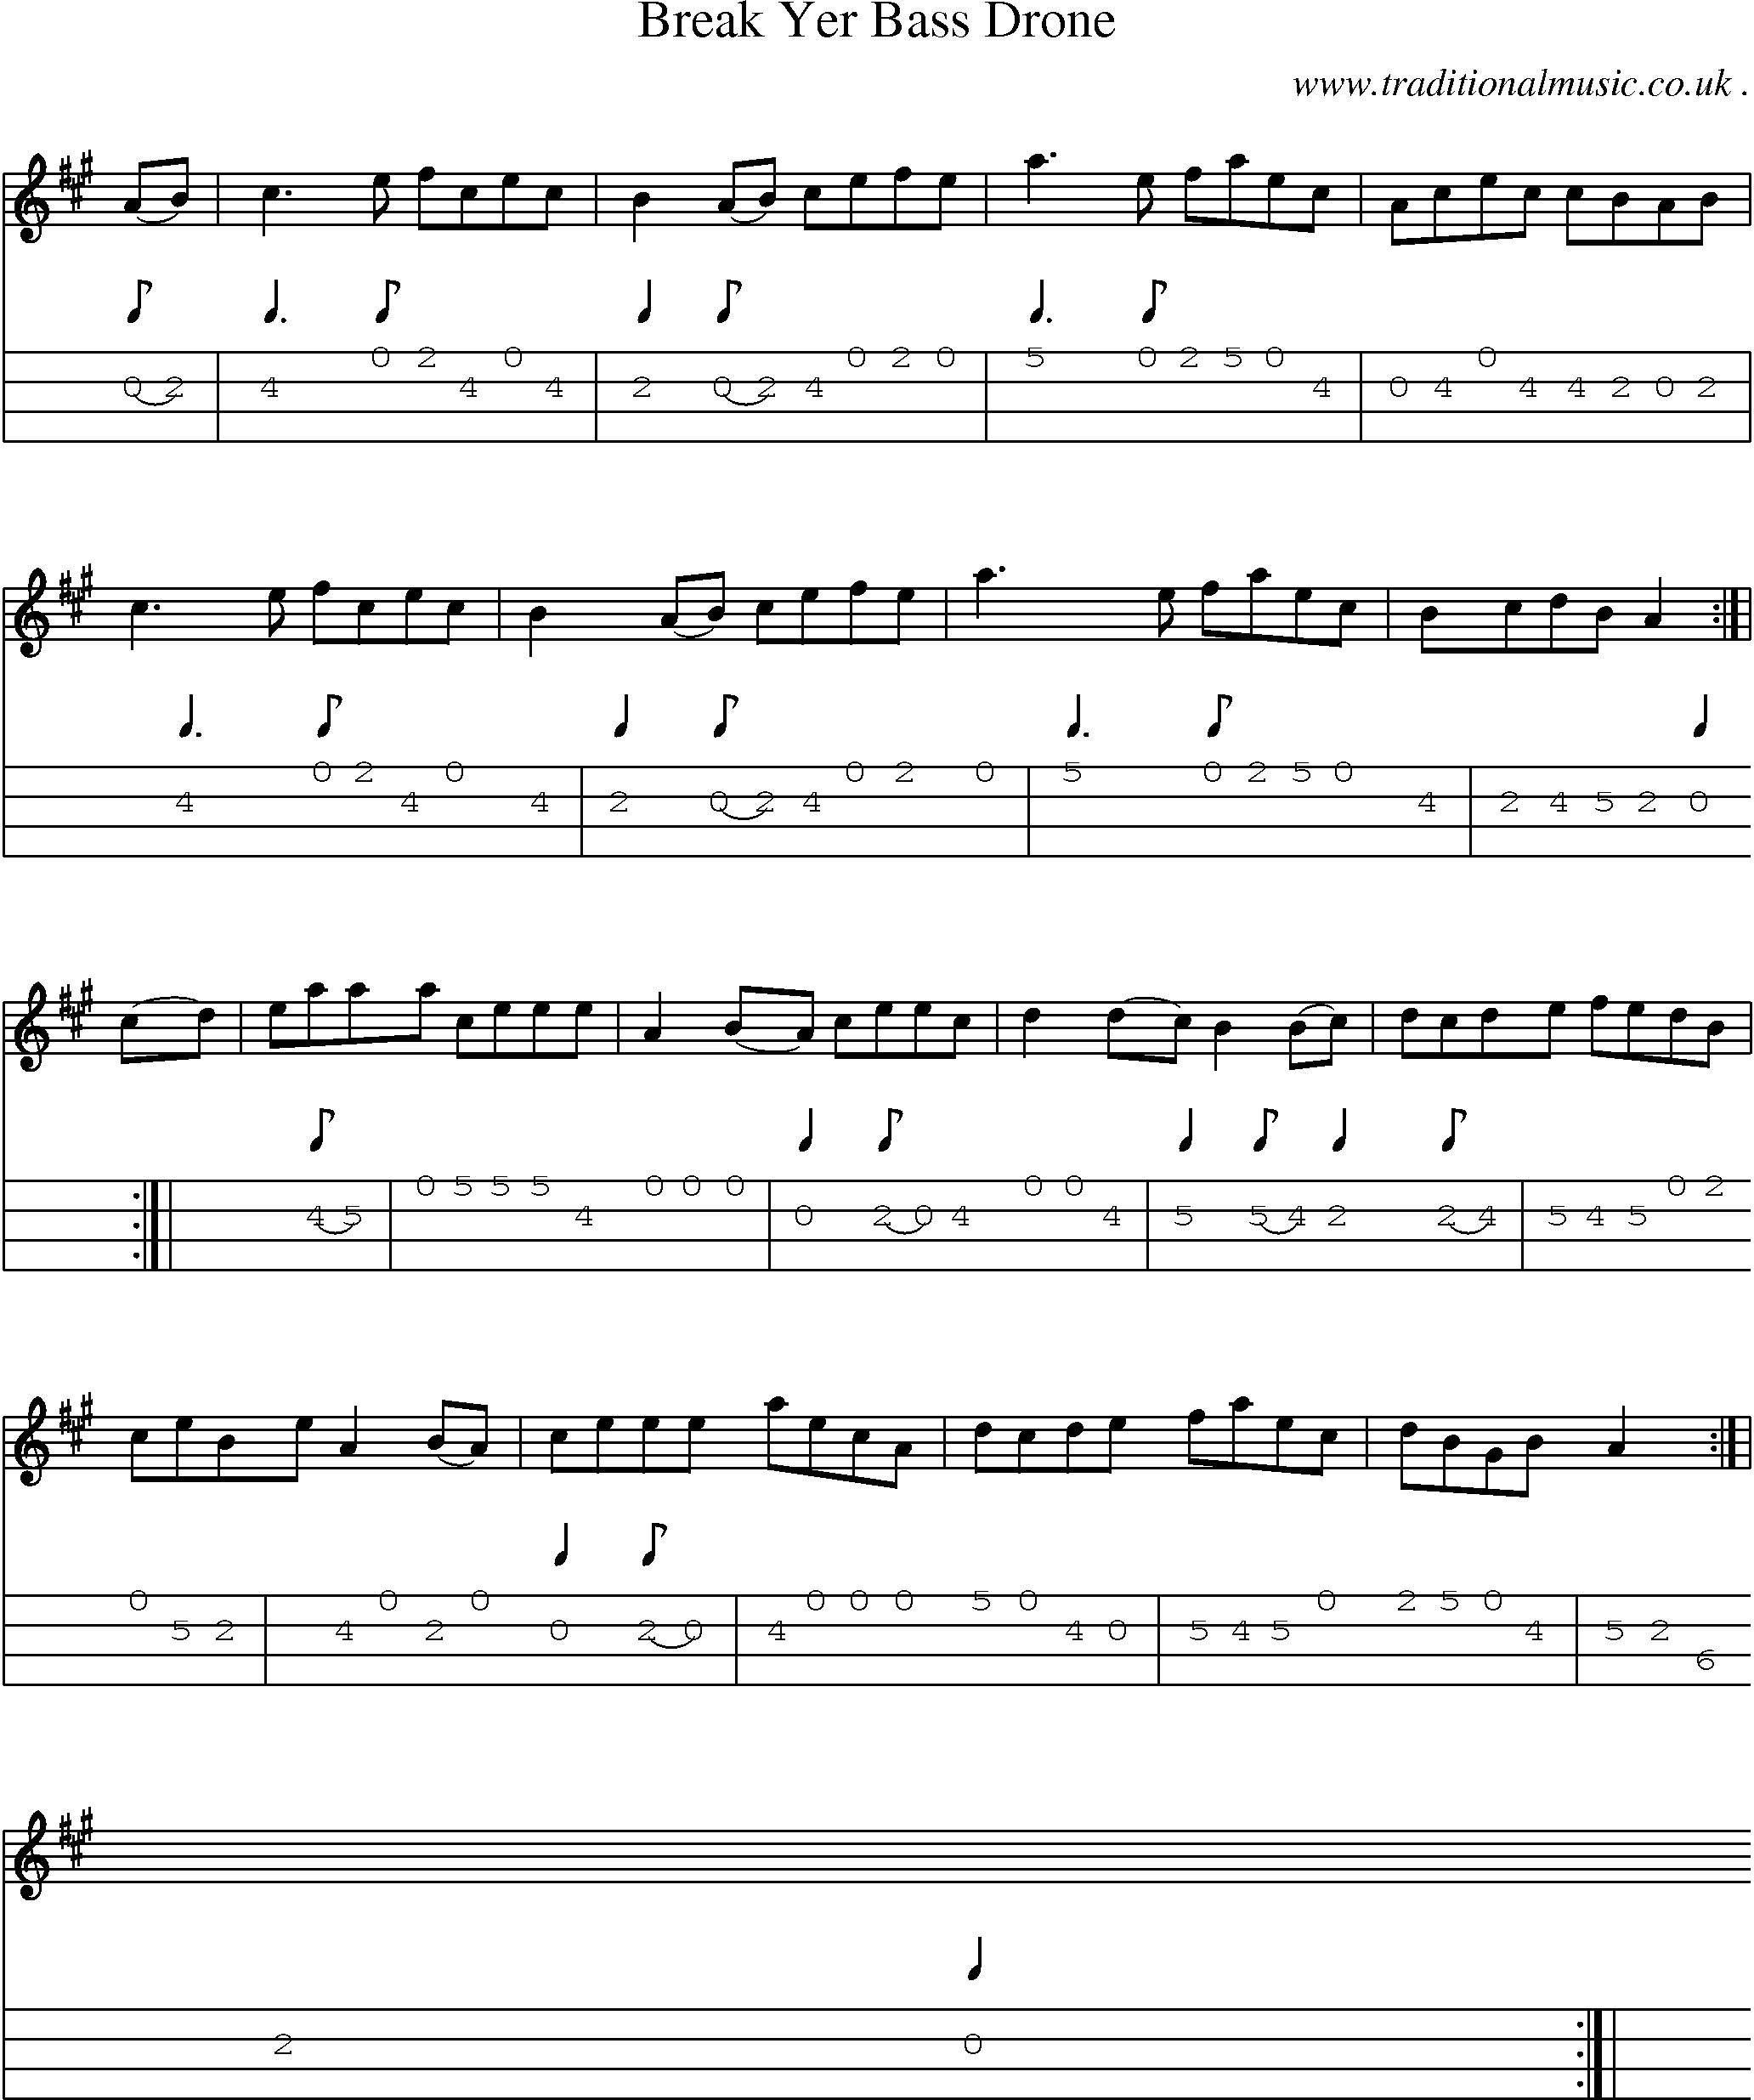 Sheet-music  score, Chords and Mandolin Tabs for Break Yer Bass Drone